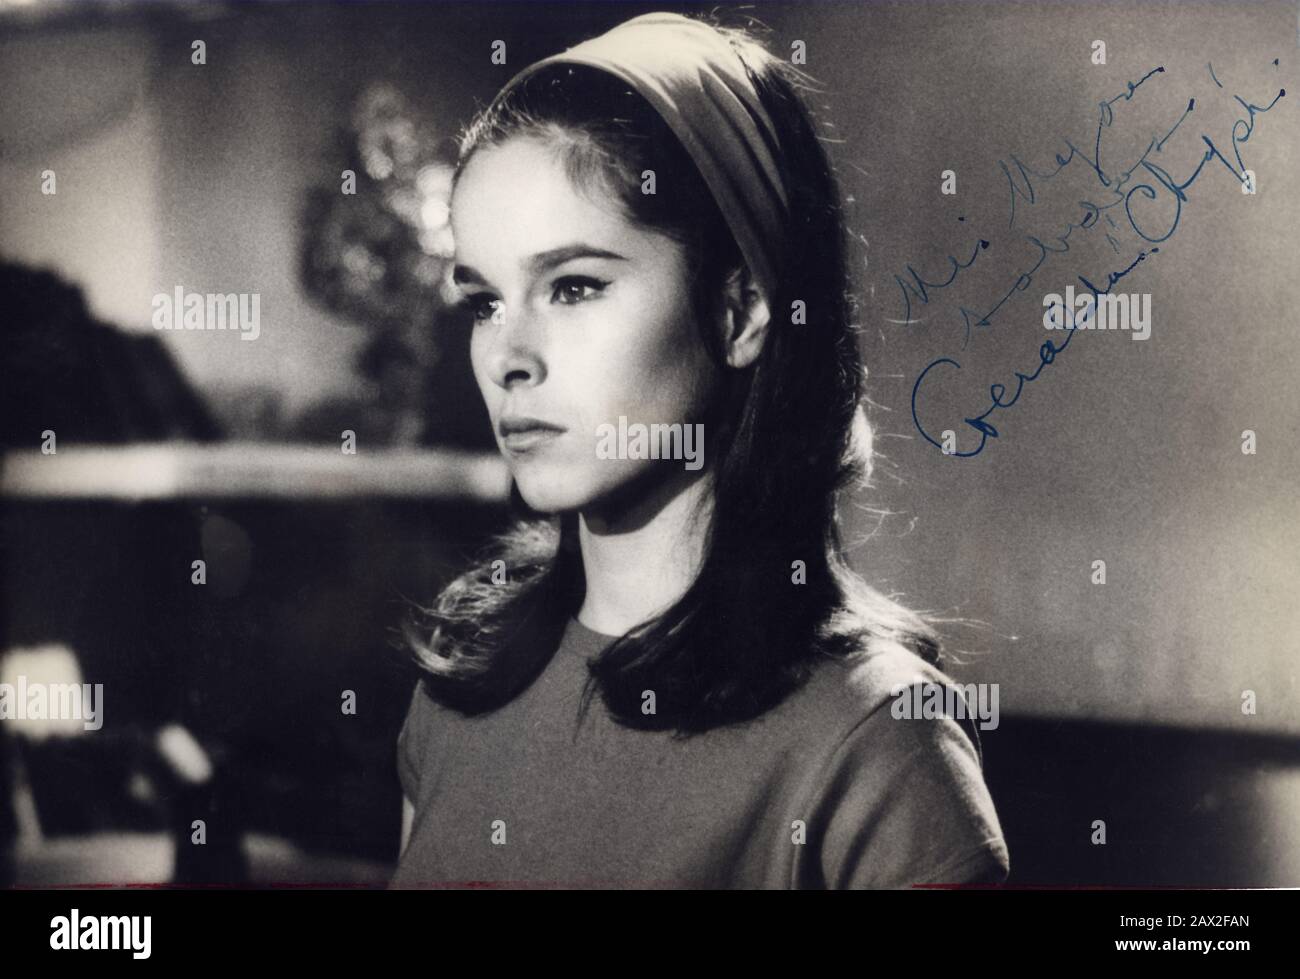 1966 ca, GREAT BRITAIN : The american actress GERALDINE CHAPLIN  ( born July 31, 1944 in Santa Monica, California, USA ), pubblicity still  . The daughter of Charles Chaplin (aka Charlie Chaplin), Geraldine Chaplin attended the Royal Ballet Academy in London. She was discovered by David Lean when she was dancing in Paris, which is what led to her role in THE DOCTOR ZHIVAGO ( 1965 - Il dottor Zivago ). She has two children, Shane and Oona .- CINEMA - movie - portrait - ritratto - AUTOGRAFO - AUTOGRAPH - firma - signature -  --- Archivio GBB Stock Photo